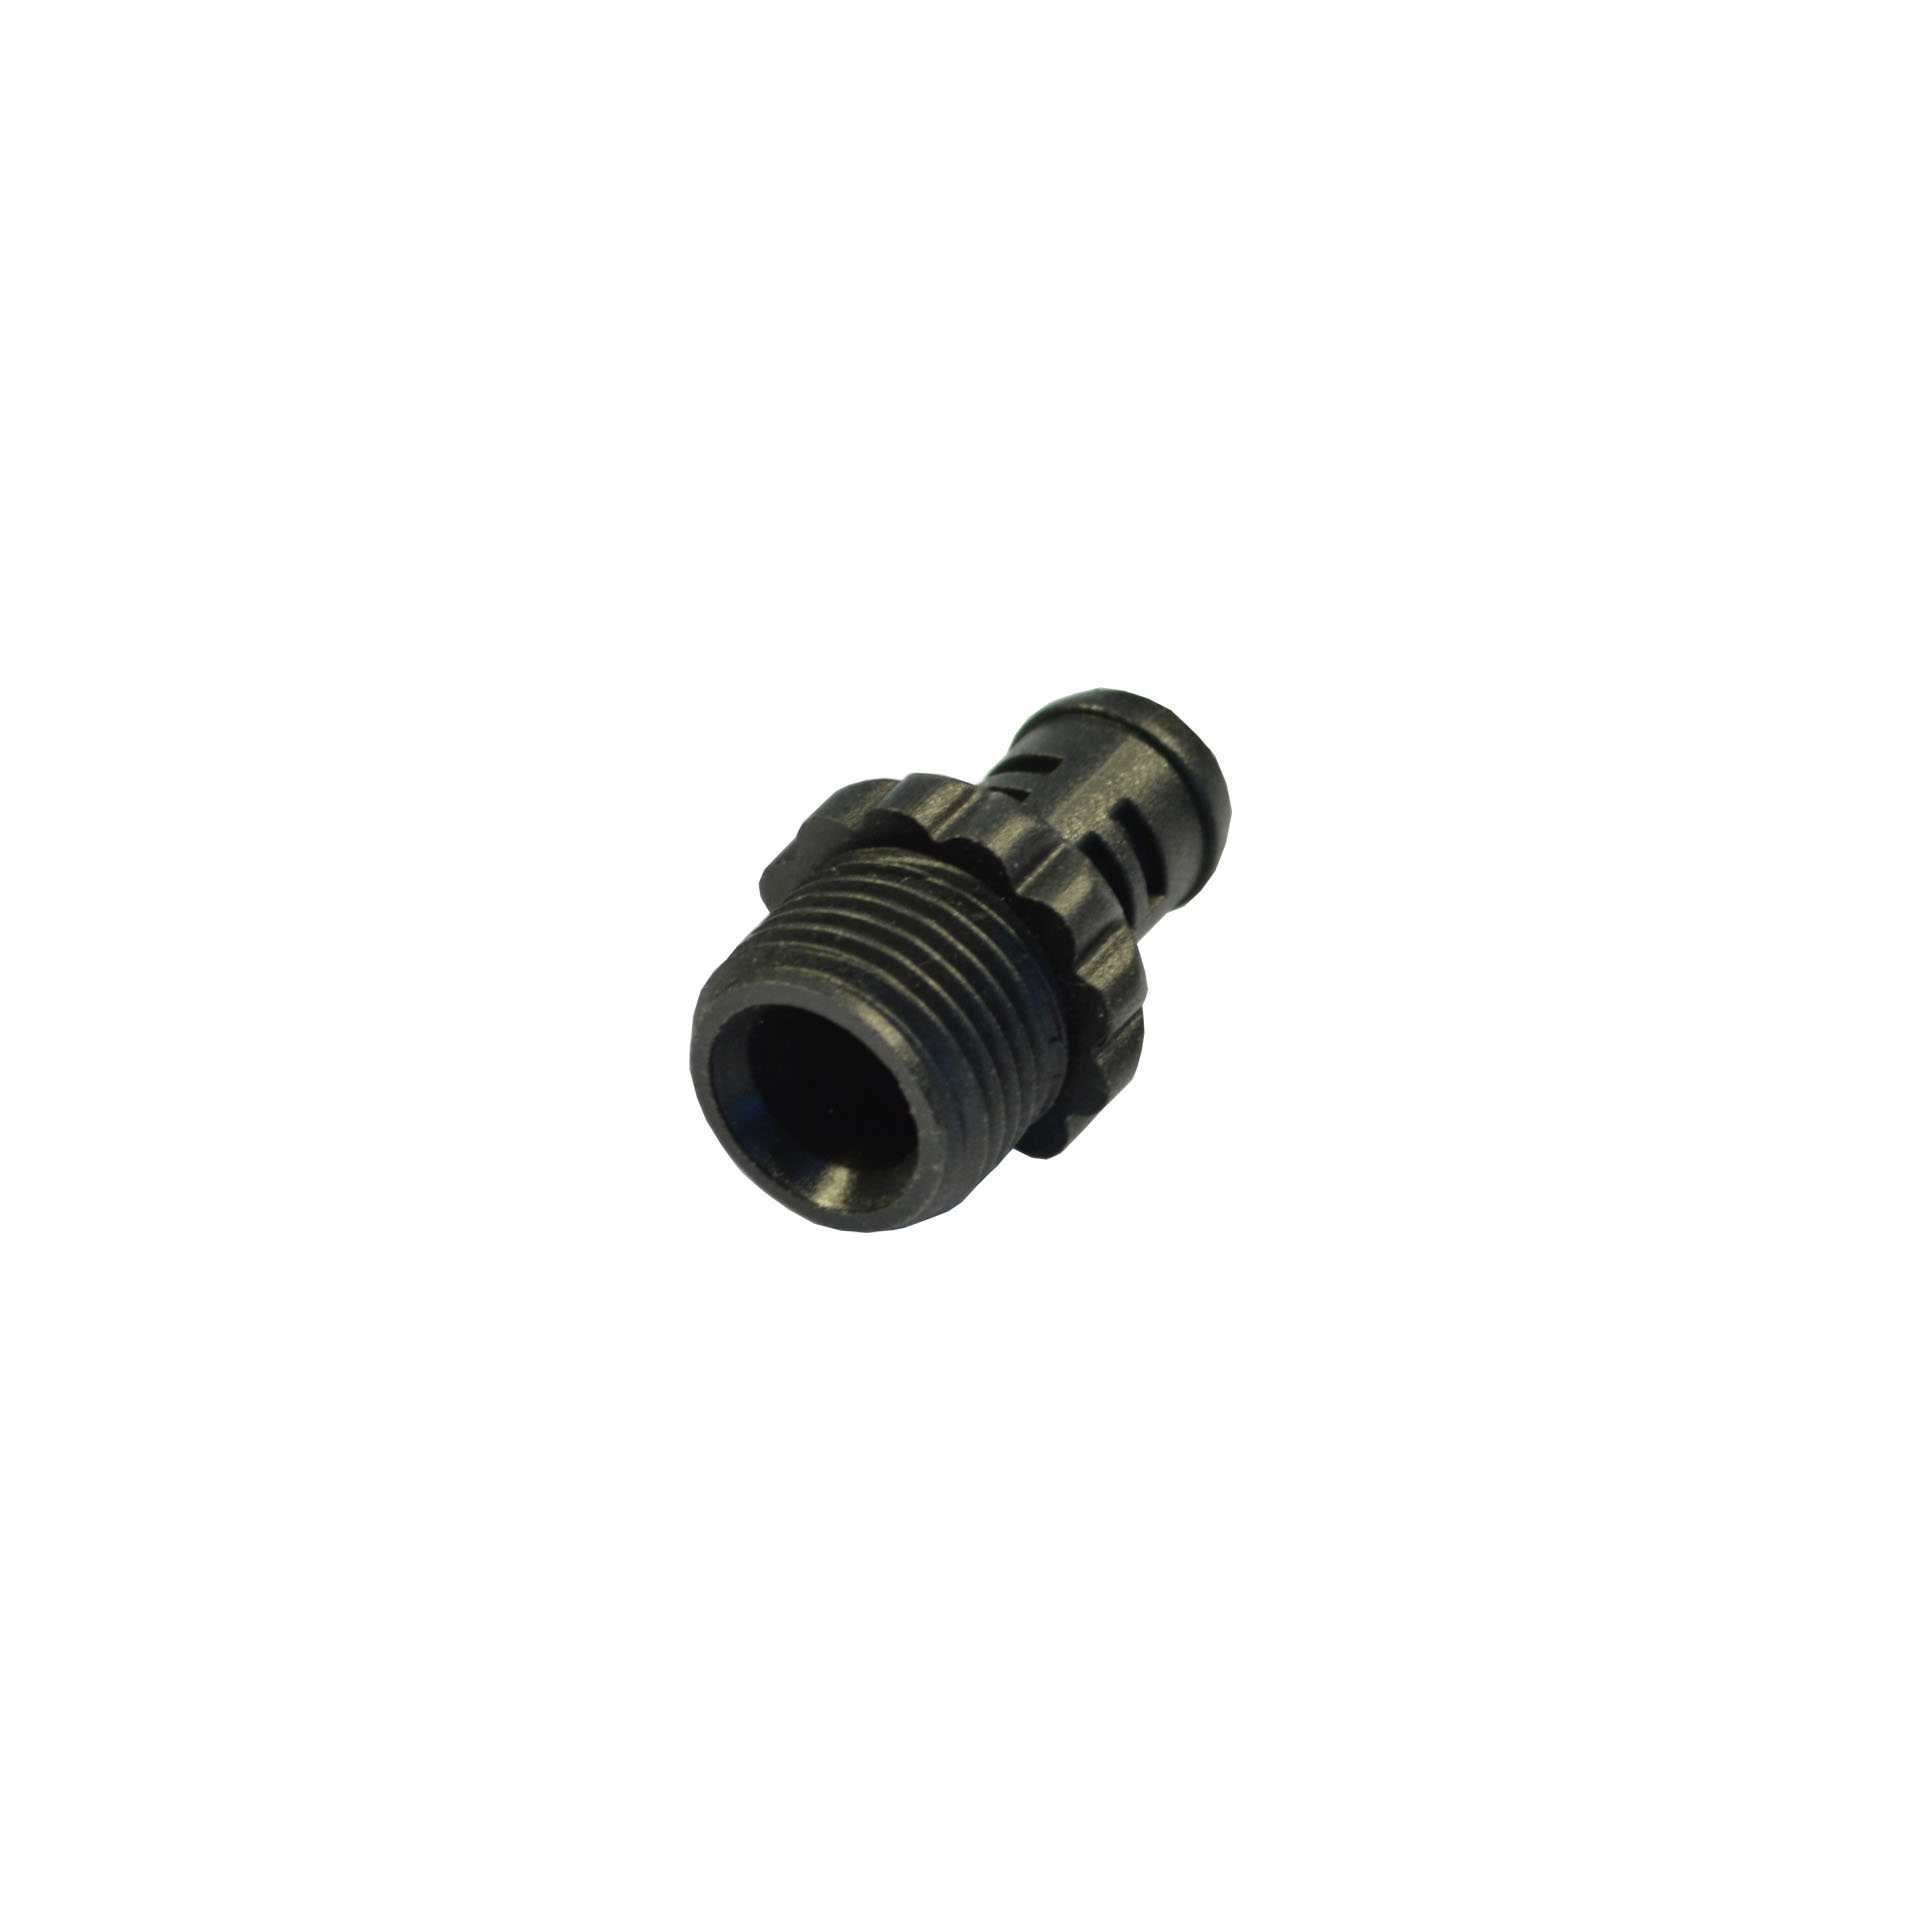 Black cable screw PG9 accessory clip junction.